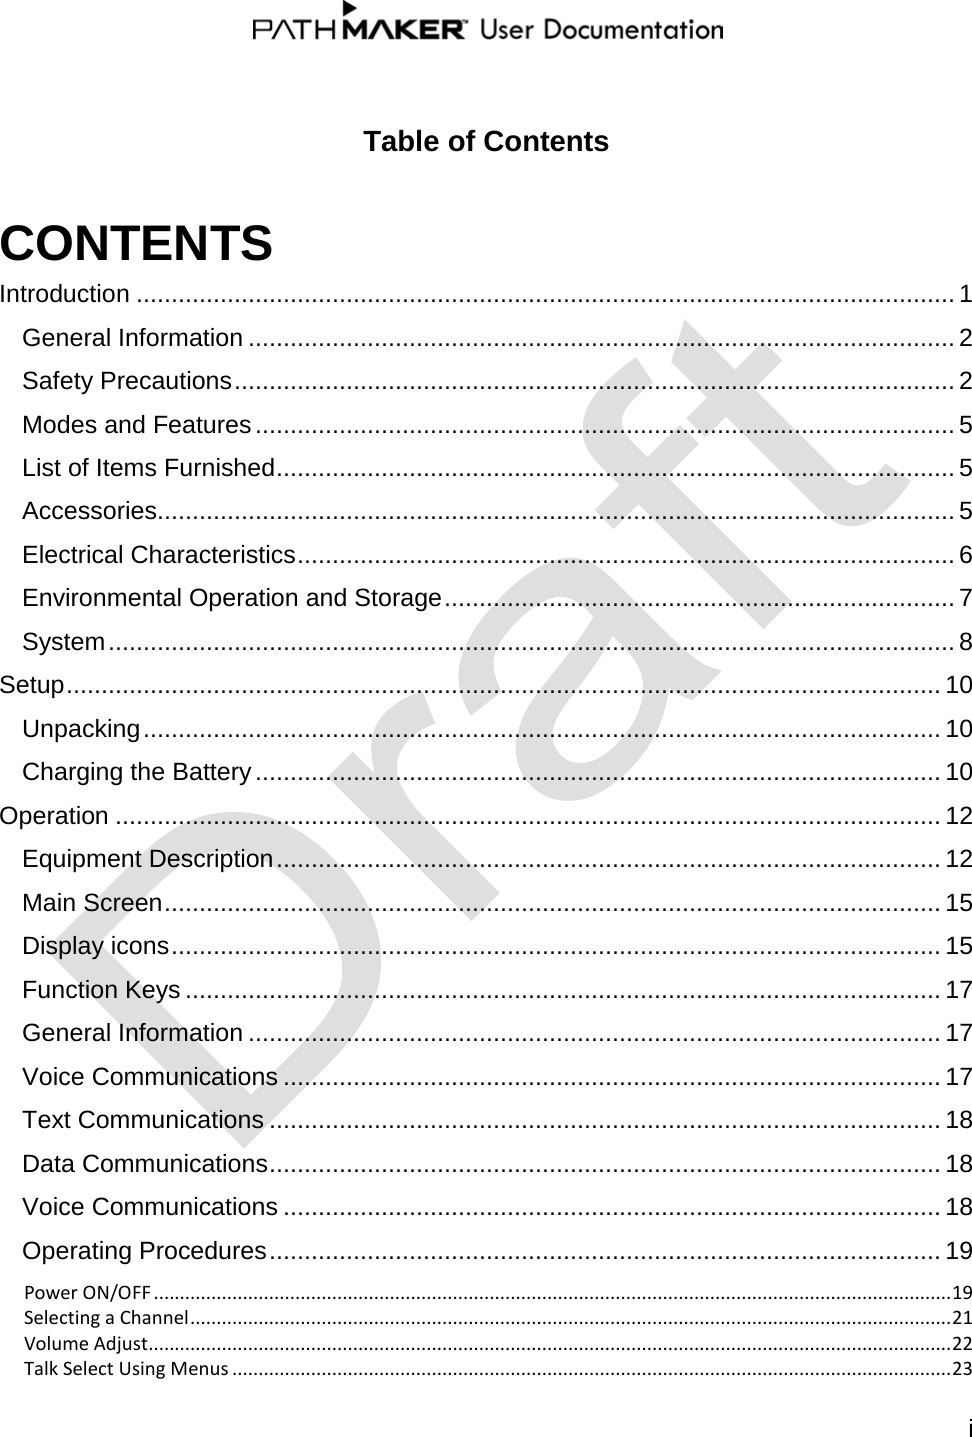   i   Table of Contents CONTENTS Introduction ..................................................................................................................... 1 General Information ..................................................................................................... 2 Safety Precautions ....................................................................................................... 2 Modes and Features .................................................................................................... 5 List of Items Furnished ................................................................................................. 5 Accessories .................................................................................................................. 5 Electrical Characteristics .............................................................................................. 6 Environmental Operation and Storage ......................................................................... 7 System ......................................................................................................................... 8 Setup ............................................................................................................................. 10 Unpacking .................................................................................................................. 10 Charging the Battery .................................................................................................. 10 Operation ...................................................................................................................... 12 Equipment Description ............................................................................................... 12 Main Screen ............................................................................................................... 15 Display icons .............................................................................................................. 15 Function Keys ............................................................................................................ 17 General Information ................................................................................................... 17 Voice Communications .............................................................................................. 17 Text Communications ................................................................................................ 18 Data Communications ................................................................................................ 18 Voice Communications .............................................................................................. 18 Operating Procedures ................................................................................................ 19 Power ON/OFF ........................................................................................................................................................ 19 Selecting a Channel ................................................................................................................................................. 21 Volume Adjust......................................................................................................................................................... 22 Talk Select Using Menus ......................................................................................................................................... 23 